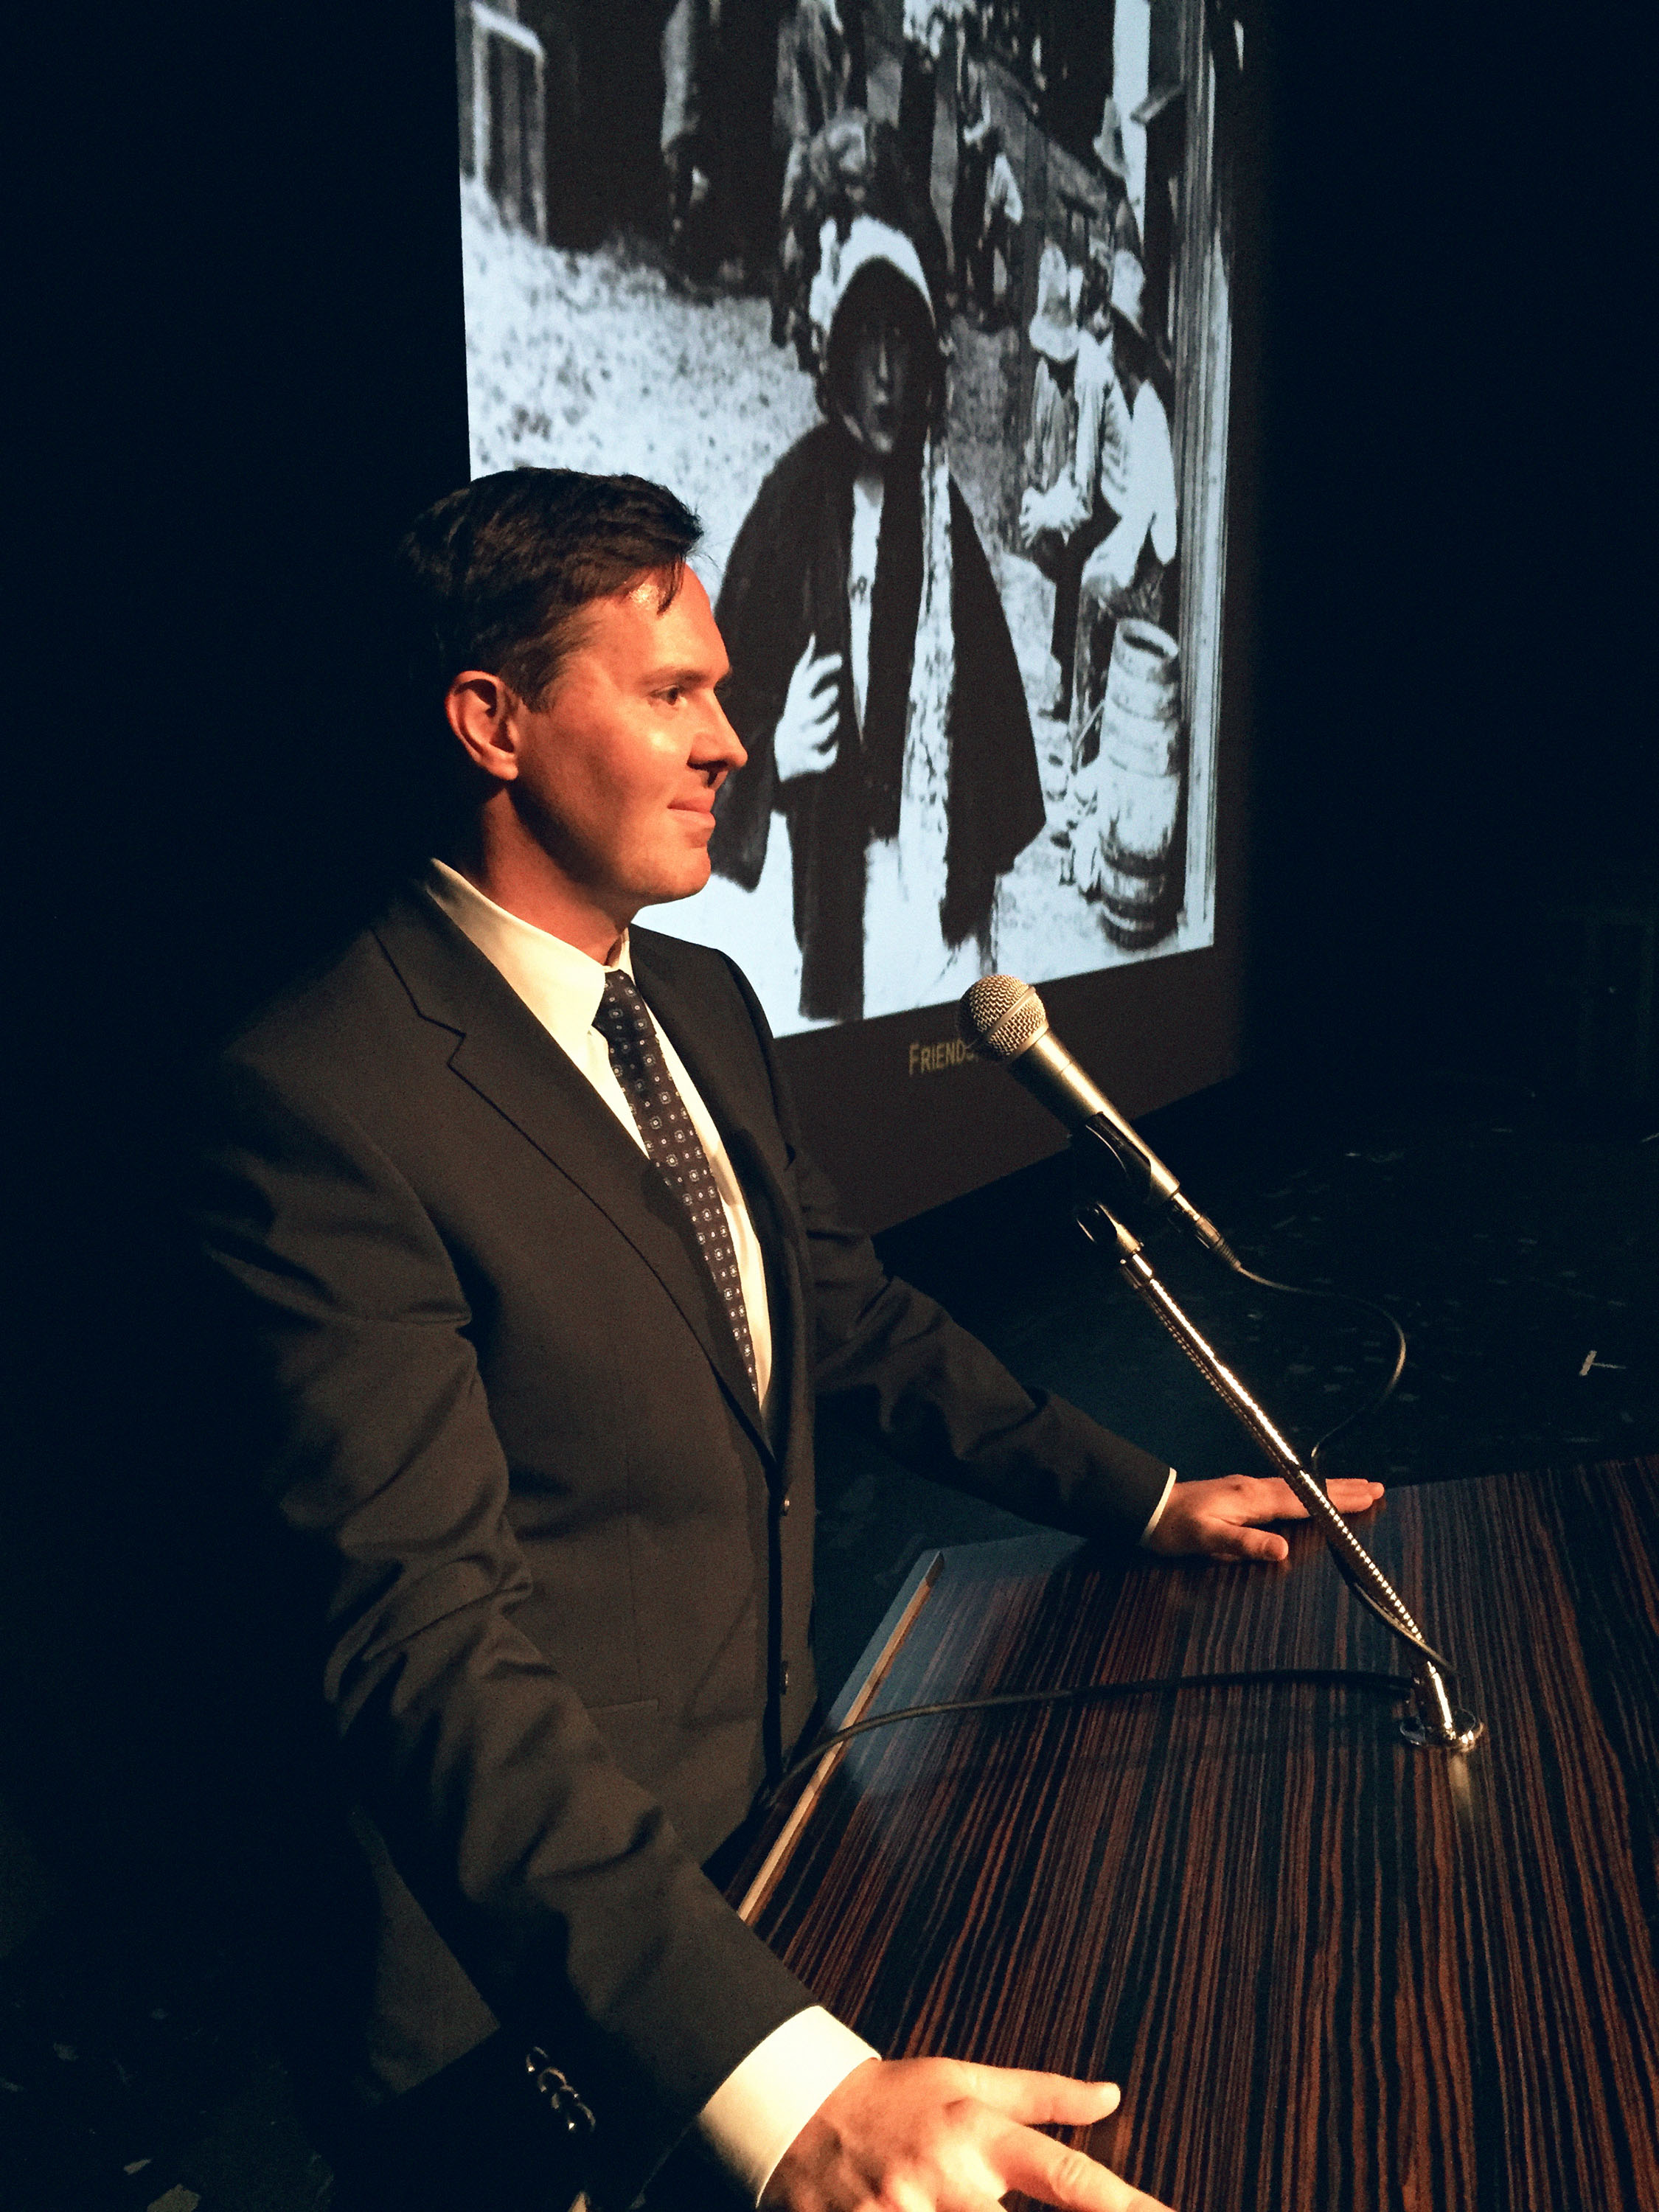 Jeffrey Vance introduces LITTLE ANNIE ROONEY (1925) at the Academy of Motion Picture Arts and Sciences' third annual 